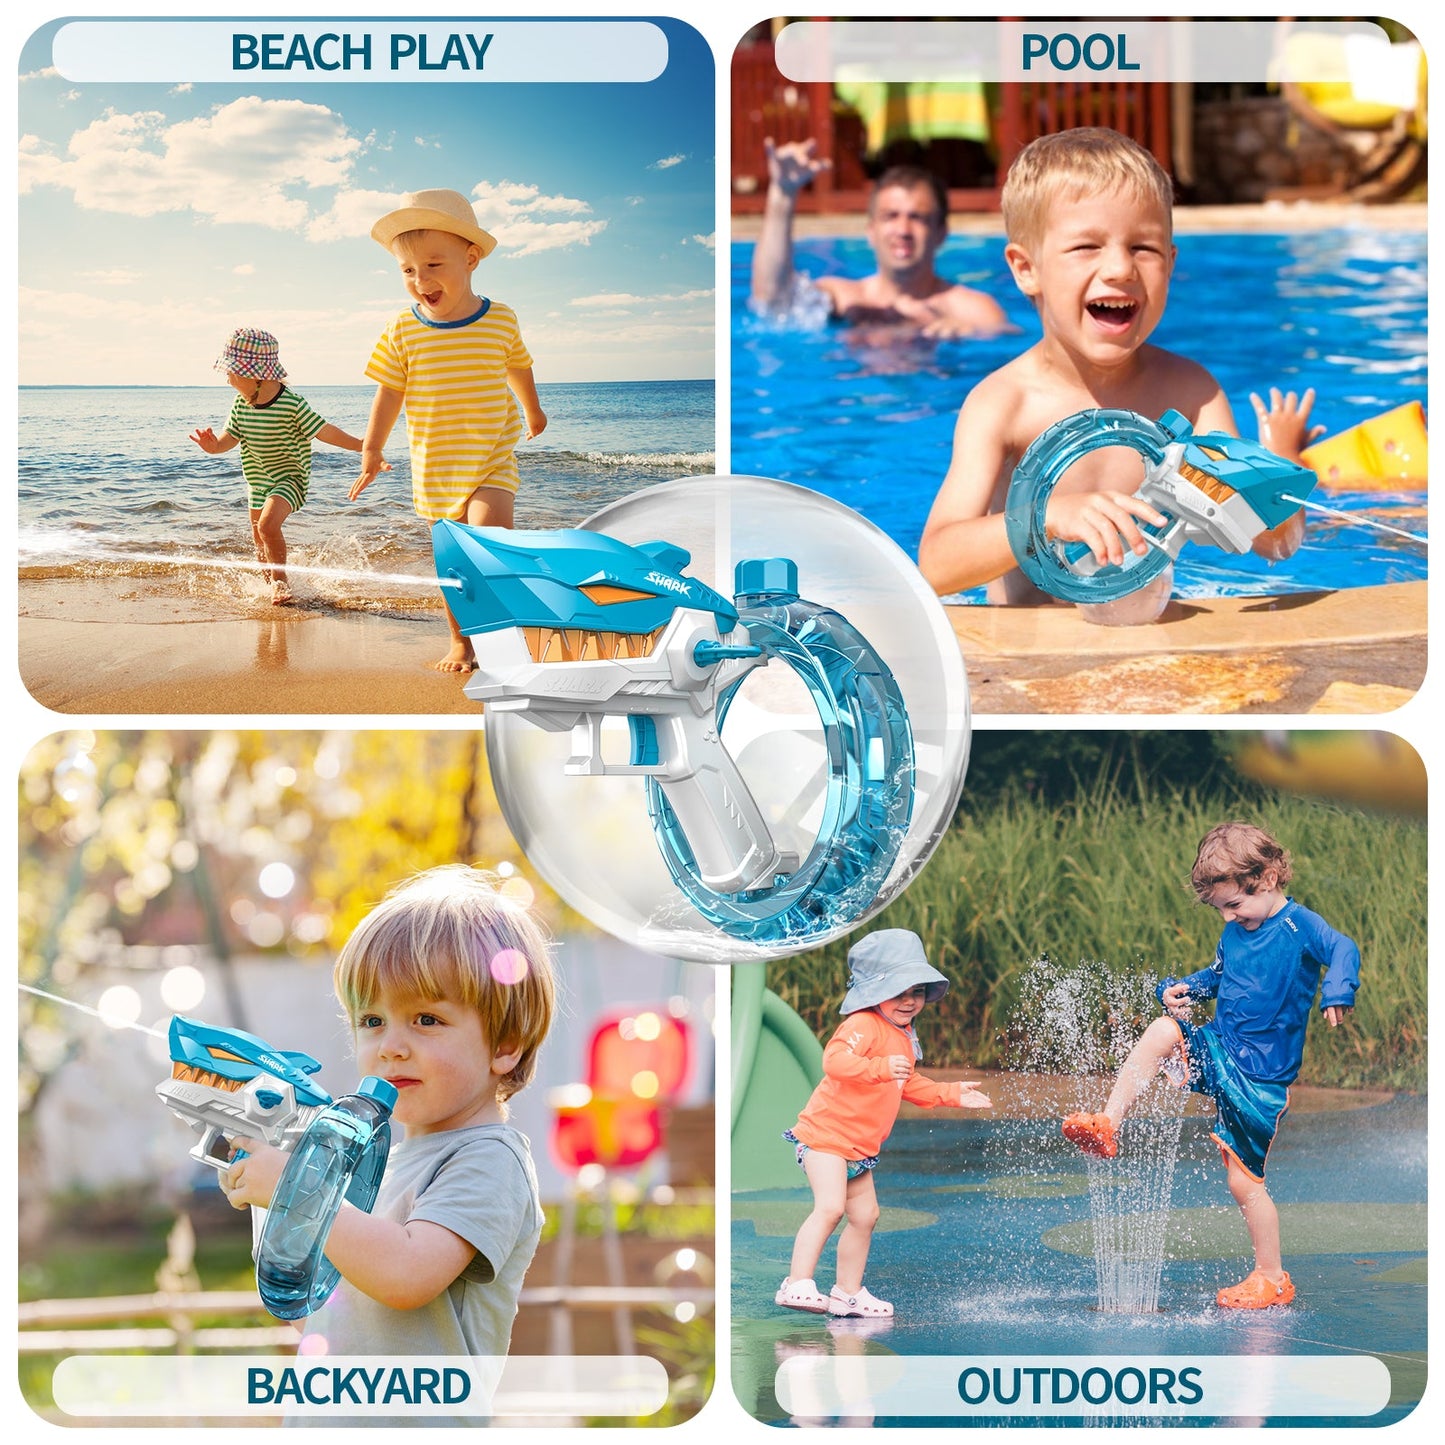 Electric Water Gun for Kids Adults Shark Automatic Absorption Squirt Guns Summer Outdoor Beach Toys Gift For Boys Girls